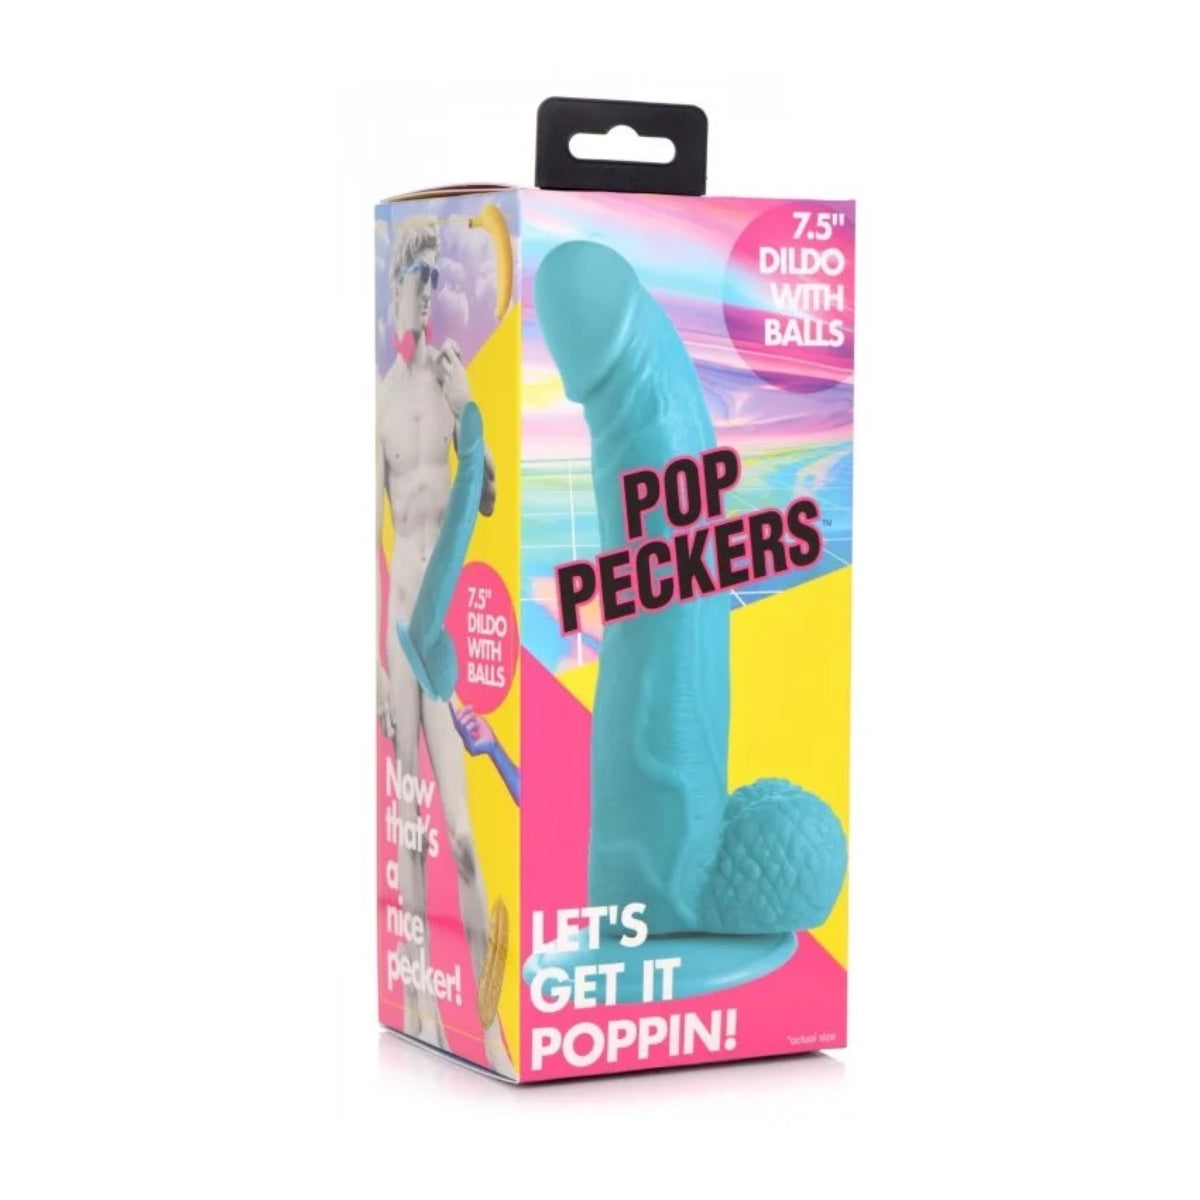 Pop Peckers Dildo With Balls Blue 7.5 Inch